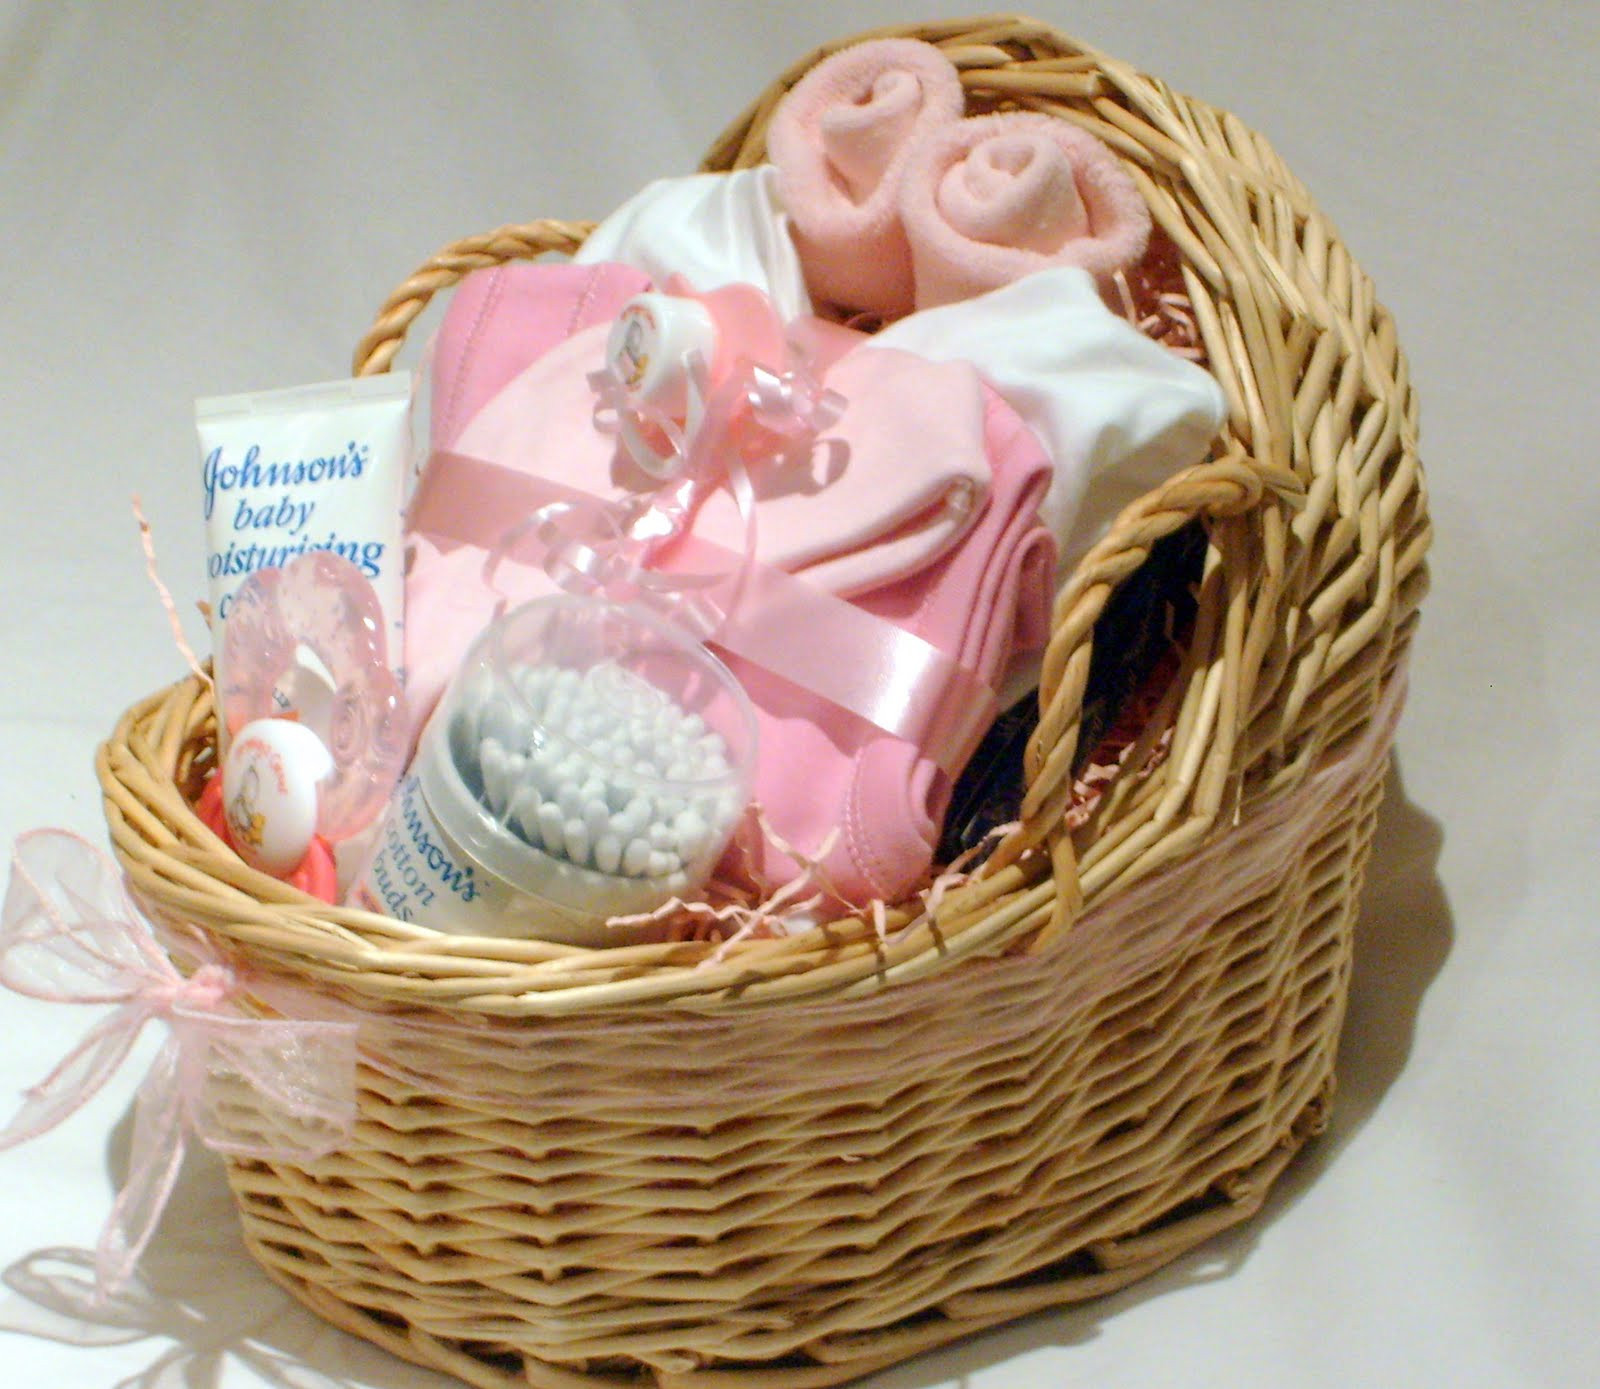 New Born Baby Gift Basket
 New Baby Gift Baskets